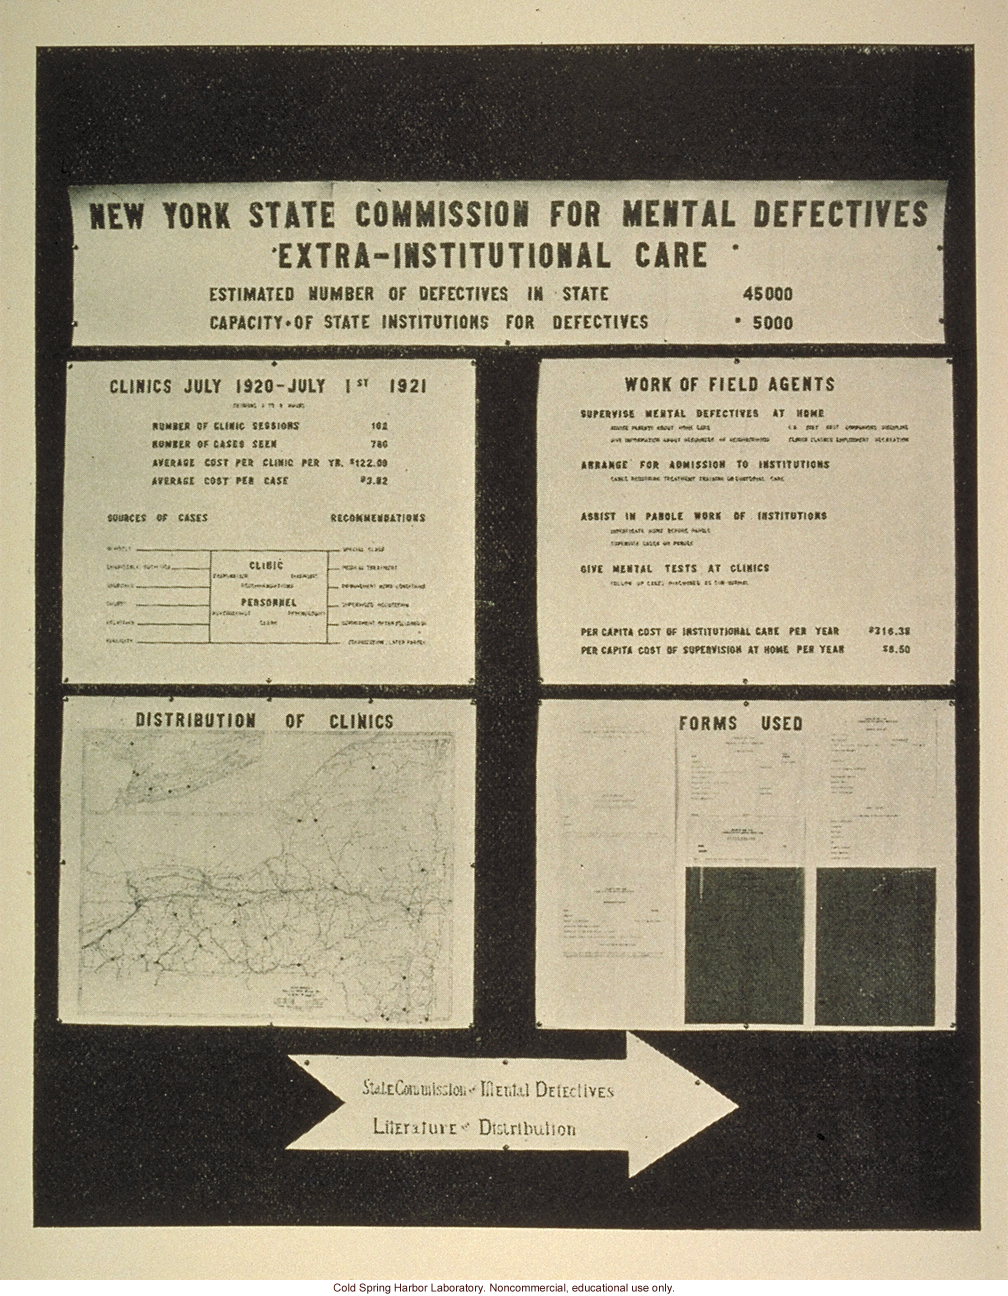 &quote;New York State Commission for mental defectives, extra-institutional care&quote;